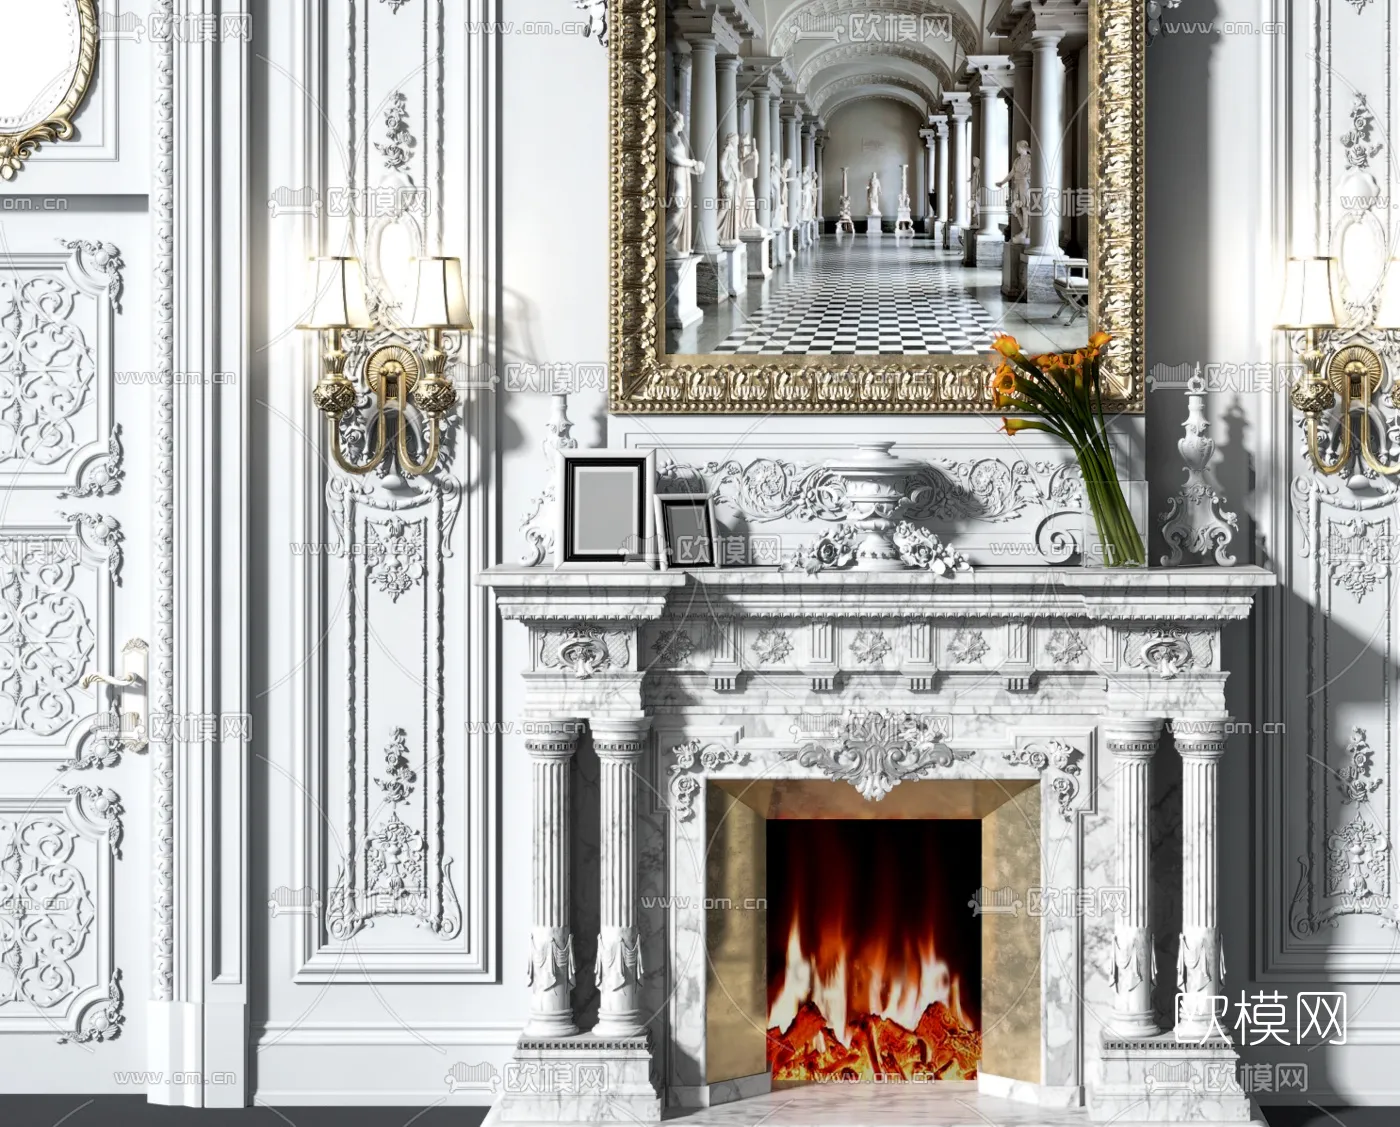 CLASSIC – FIREPLACE 3DMODELS – 039